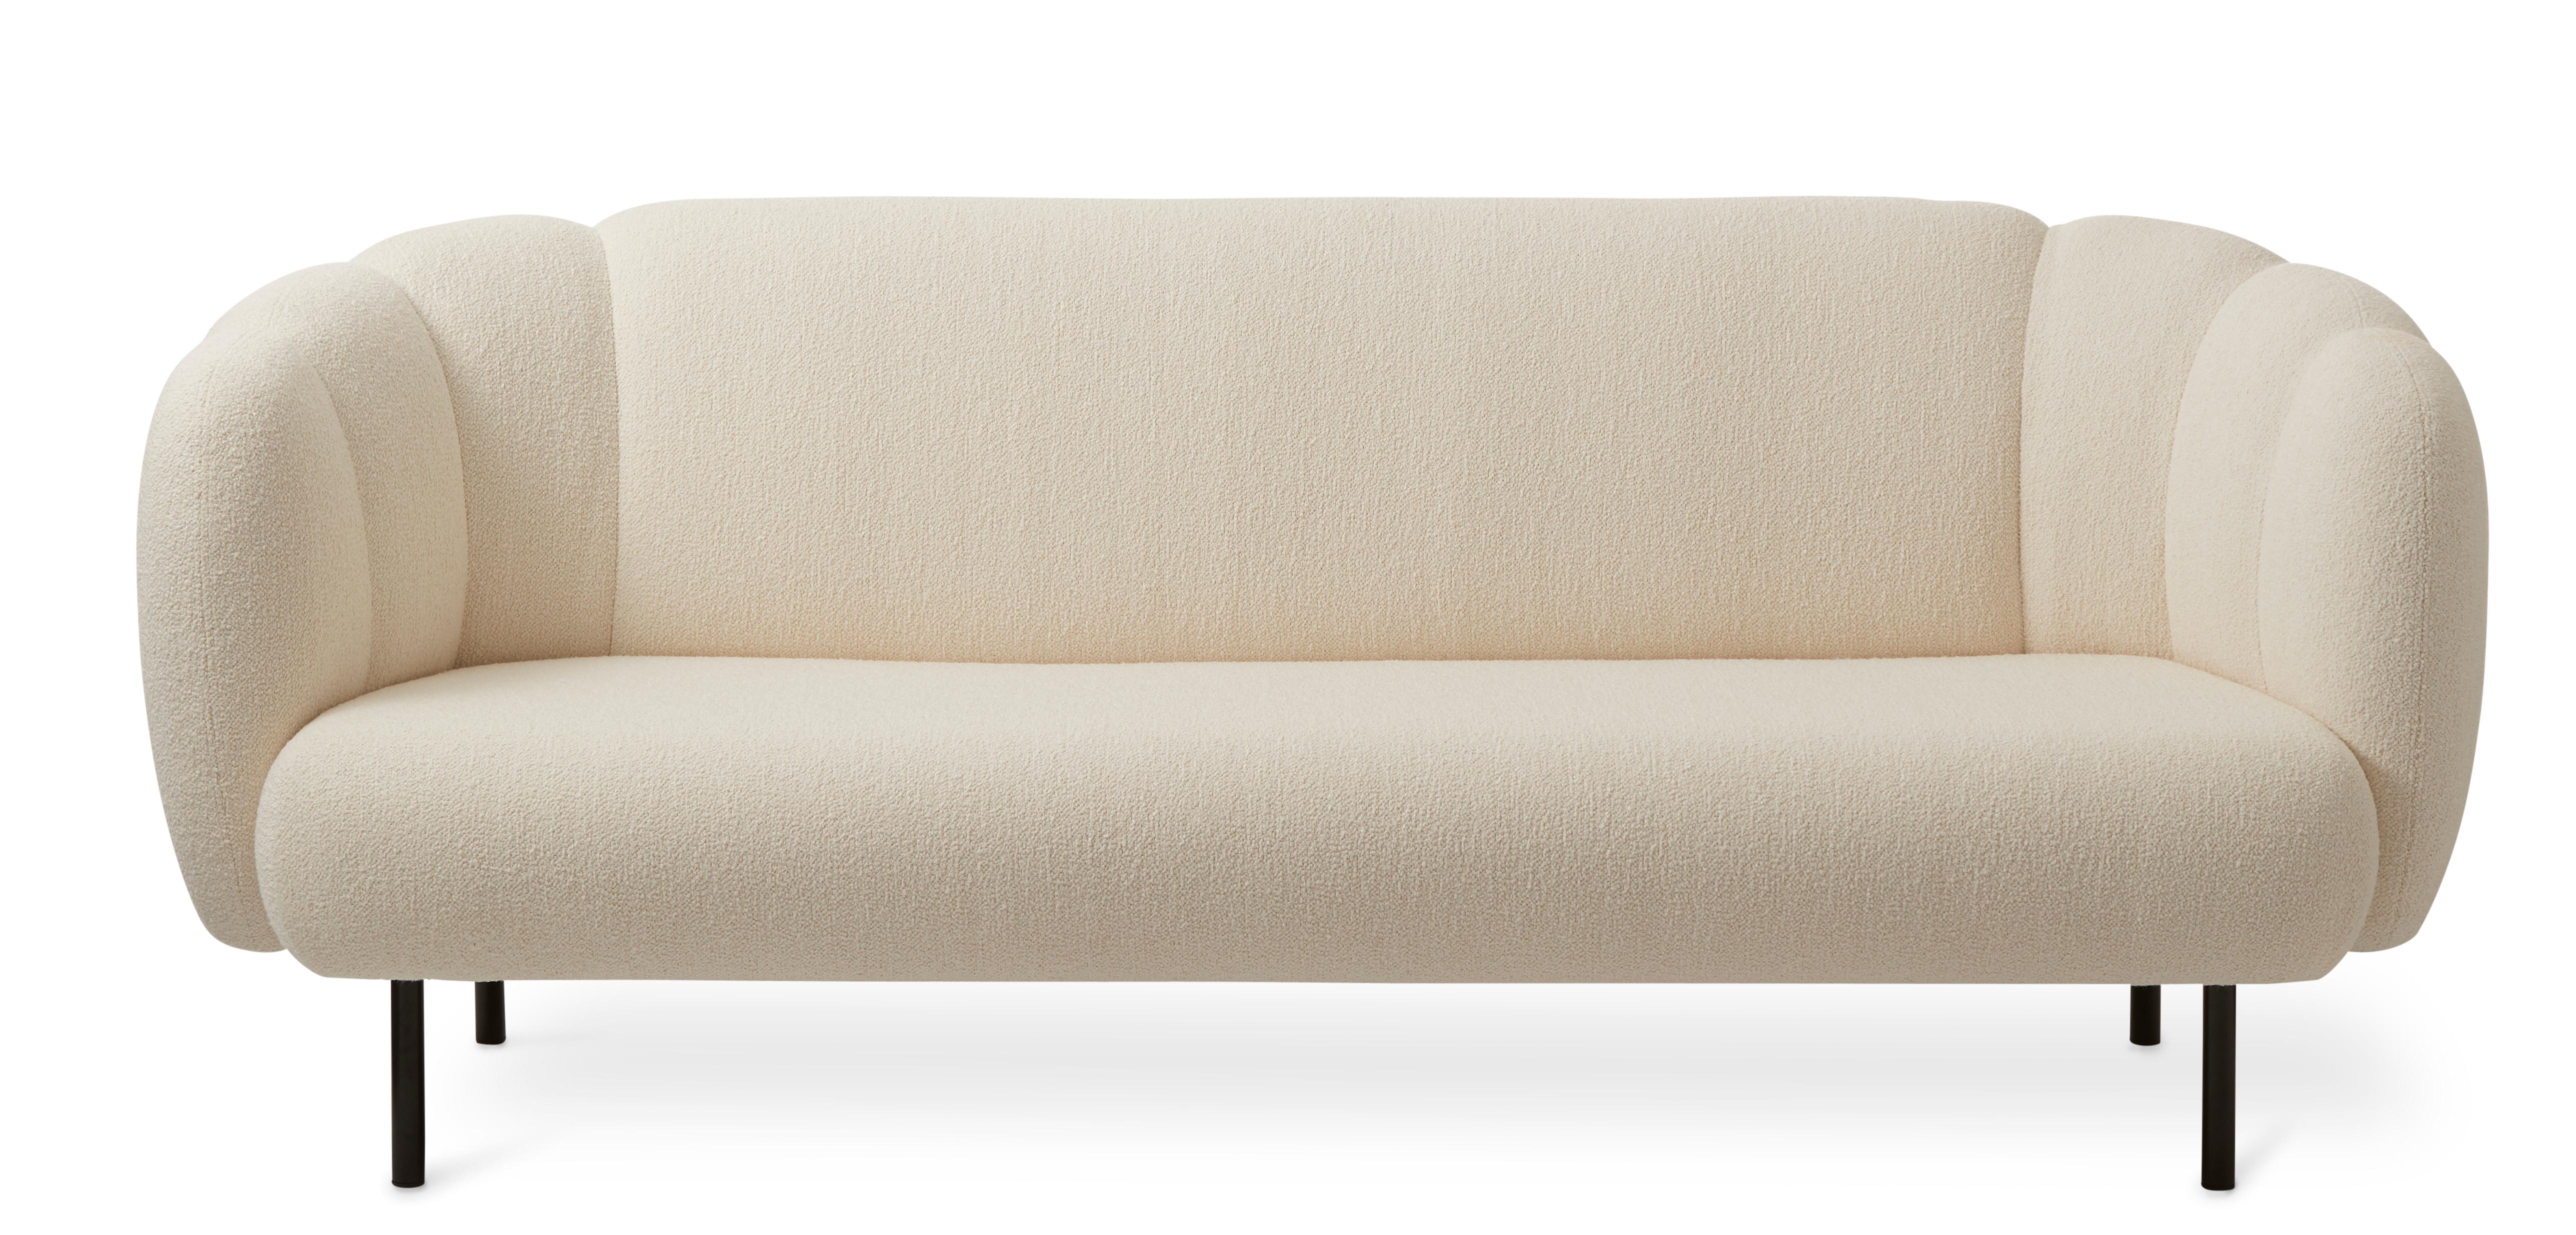 For Sale: White (Barnum 24) Cape 3-Seat Stitch Sofa, by Charlotte Høncke from Warm Nordic